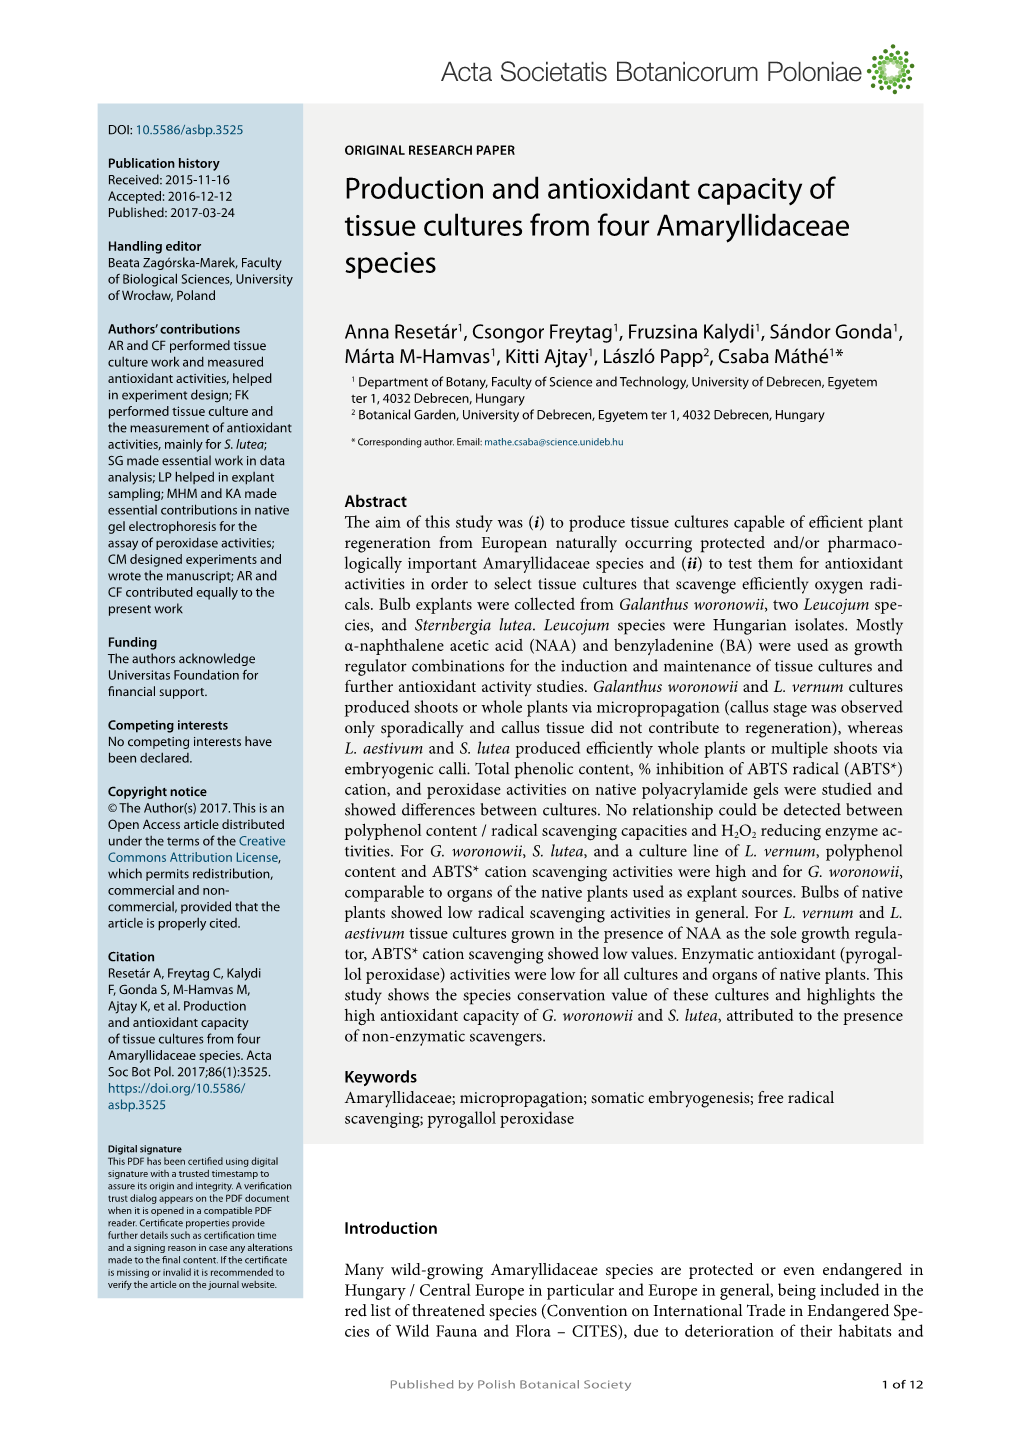 Production and Antioxidant Capacity of Tissue Cultures from Four